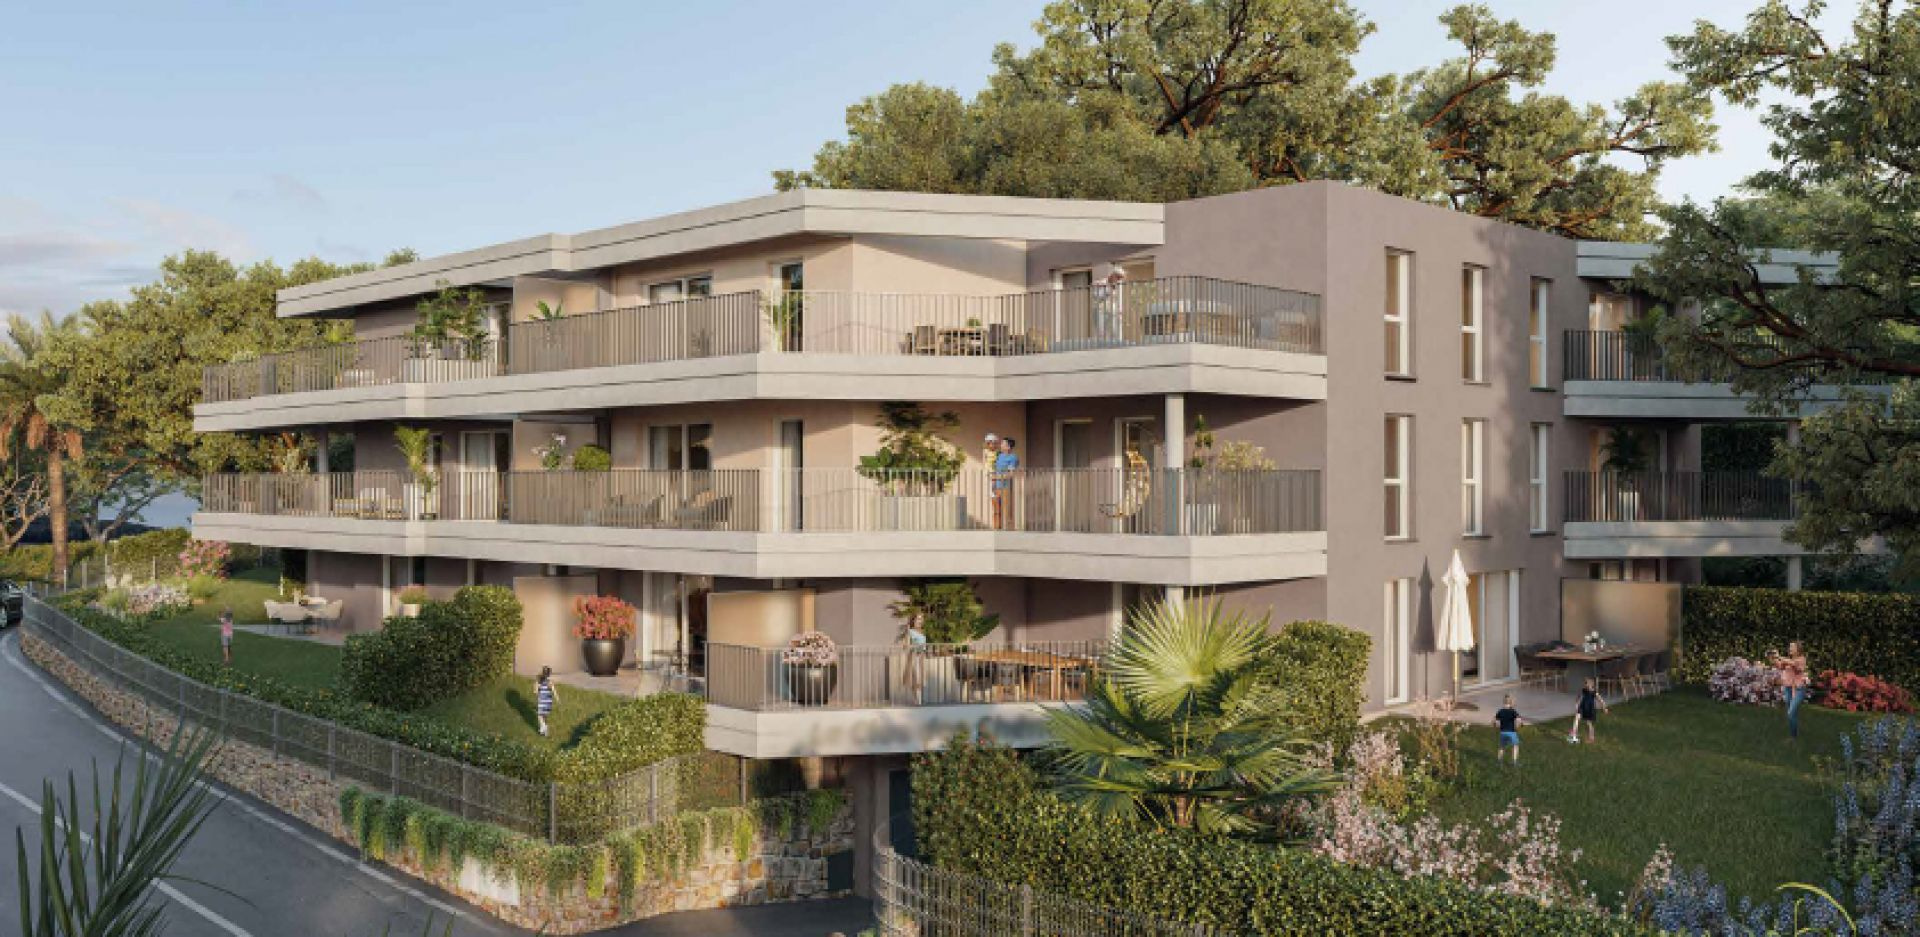 3 bedroom apartment in new development in Cannes